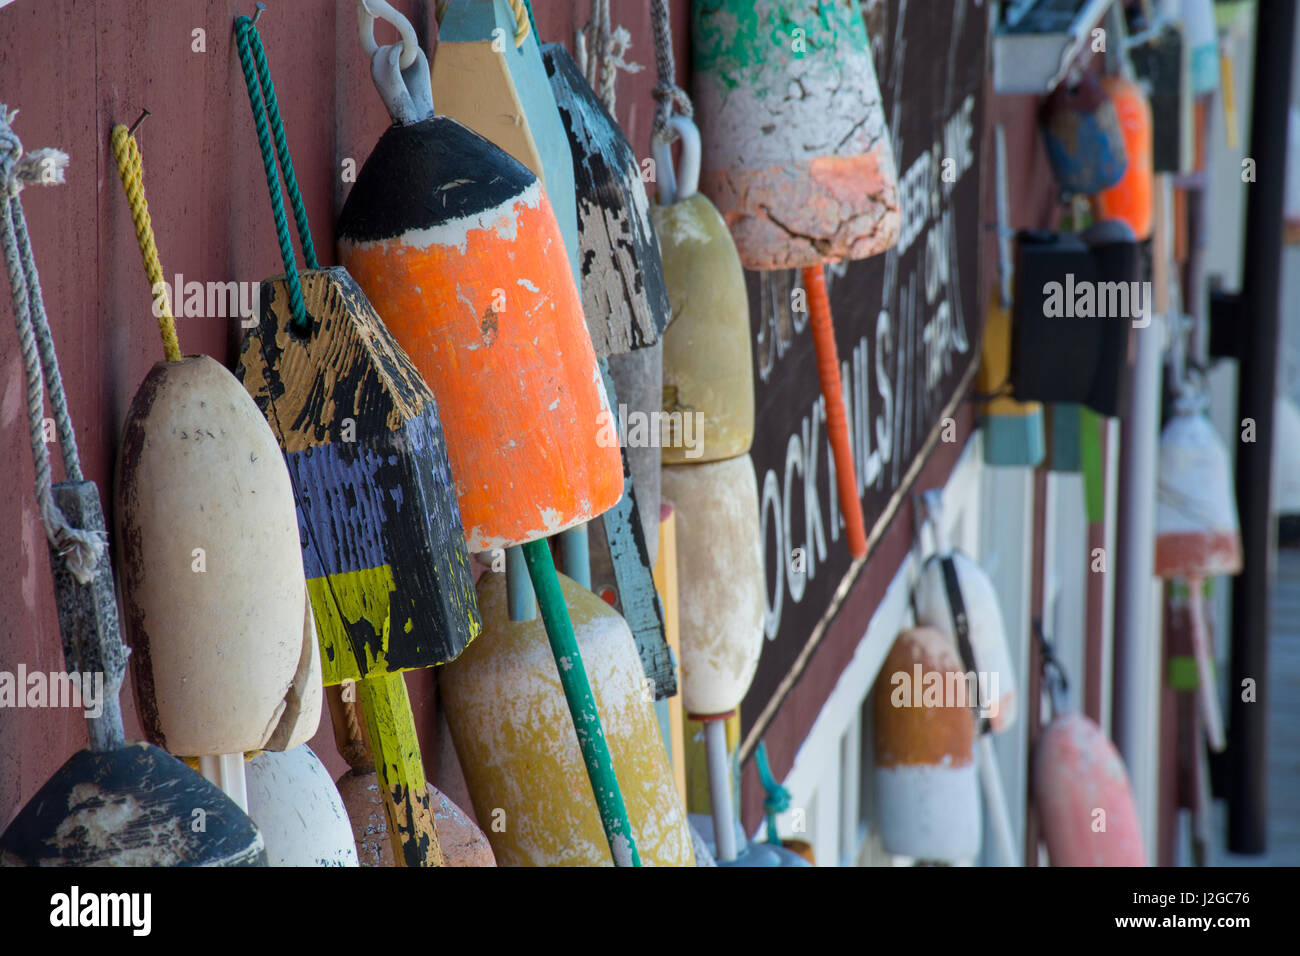 Maine, Bar Harbor. Colorful lobster trap buoys hanging on wall. Stock Photo